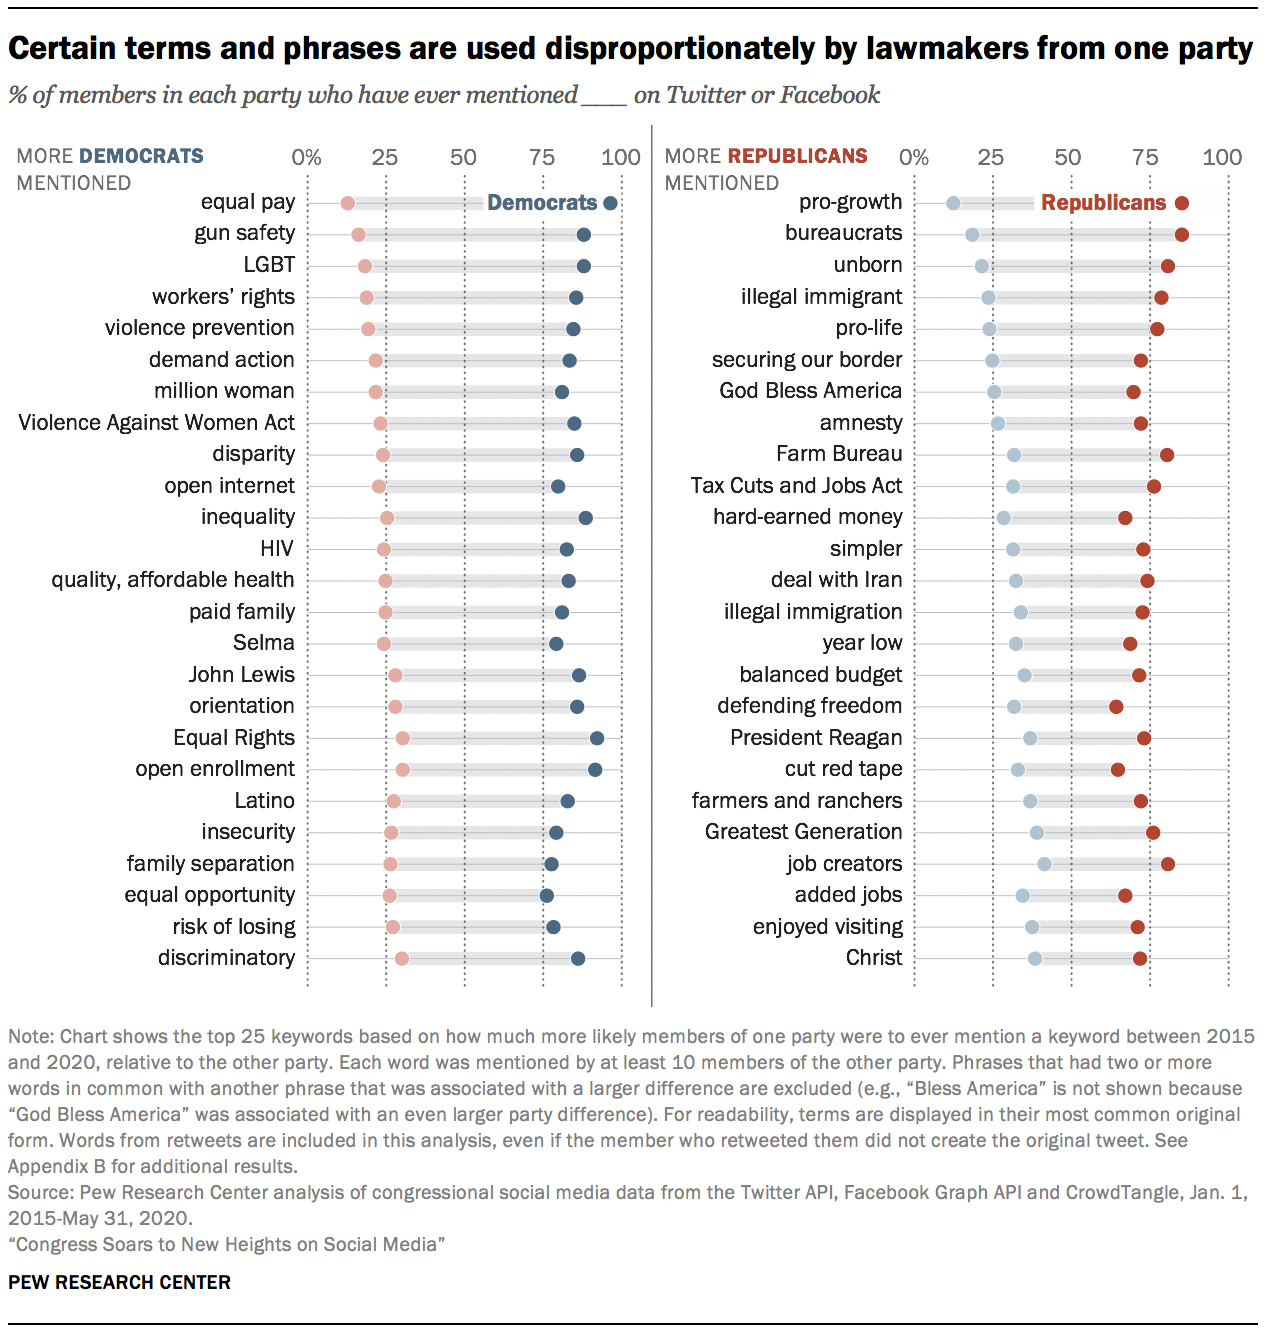 Certain terms and phrases are used disproportionately by lawmakers from one party